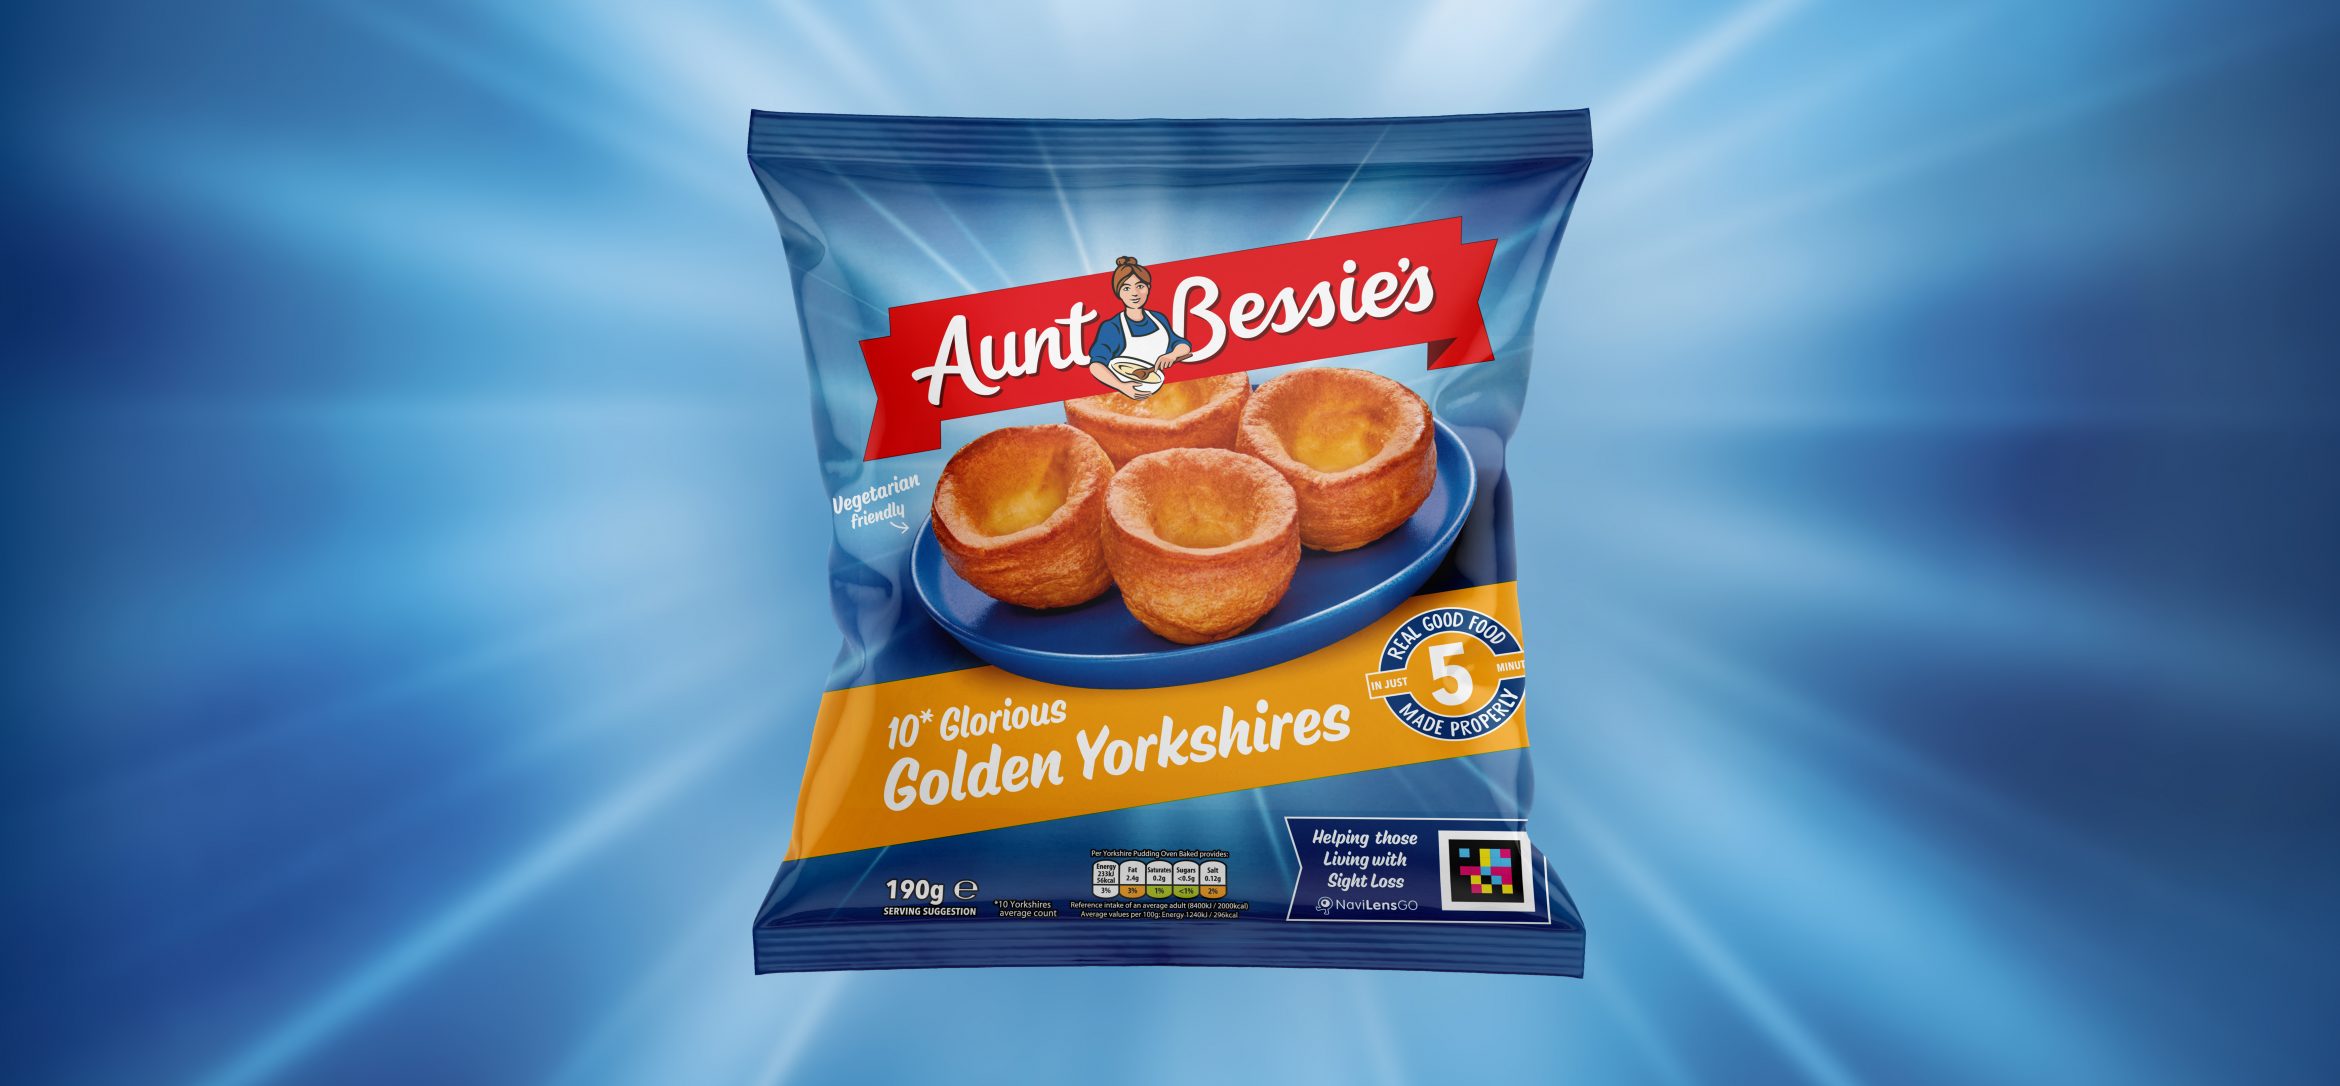 Creating the ‘Ta-Da!’ moment for Aunt Bessie’s image